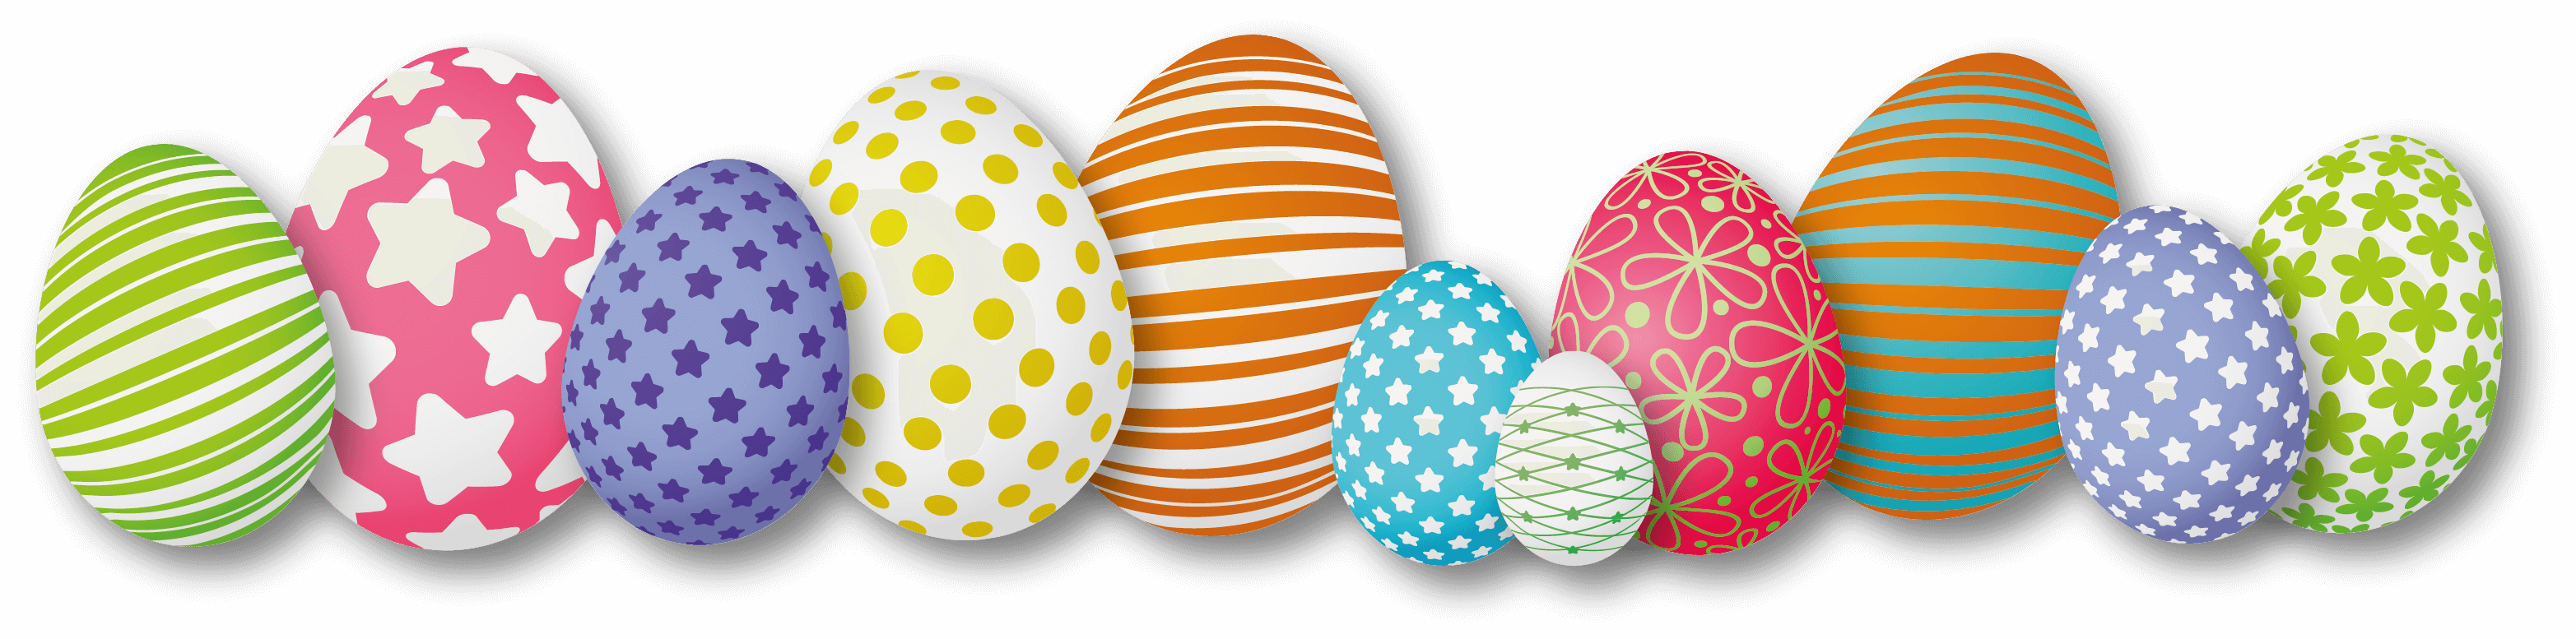 Easter Eggs Holidays Colorful PNG